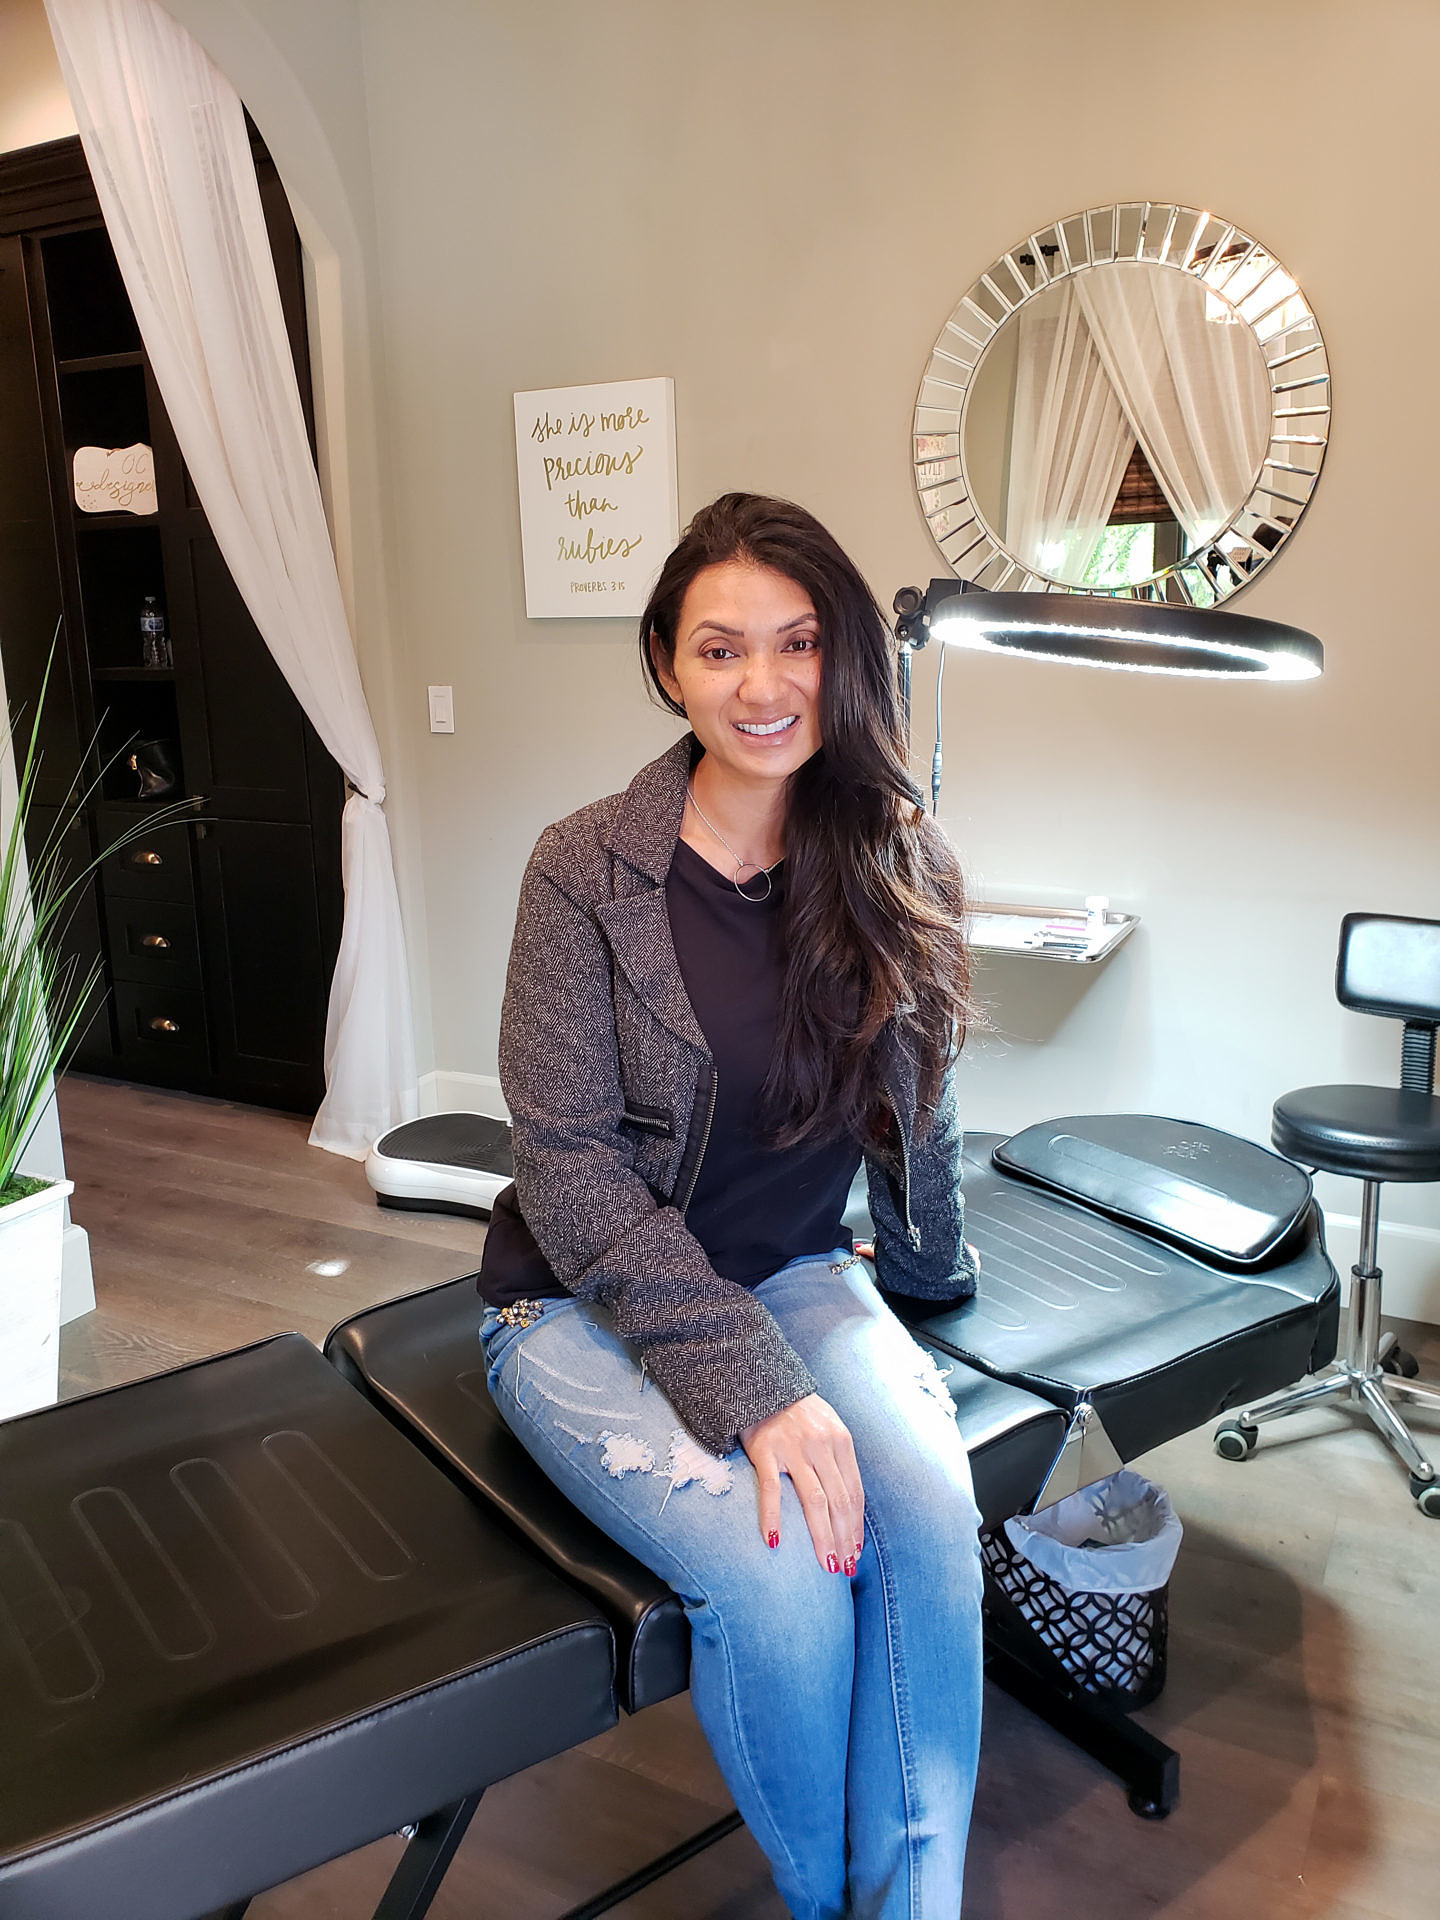 Curious about microbladding? Orange County Style Blogger Debbie Savage is sharing how she is upping her brow game with microbladding.  Click to see her experience here!